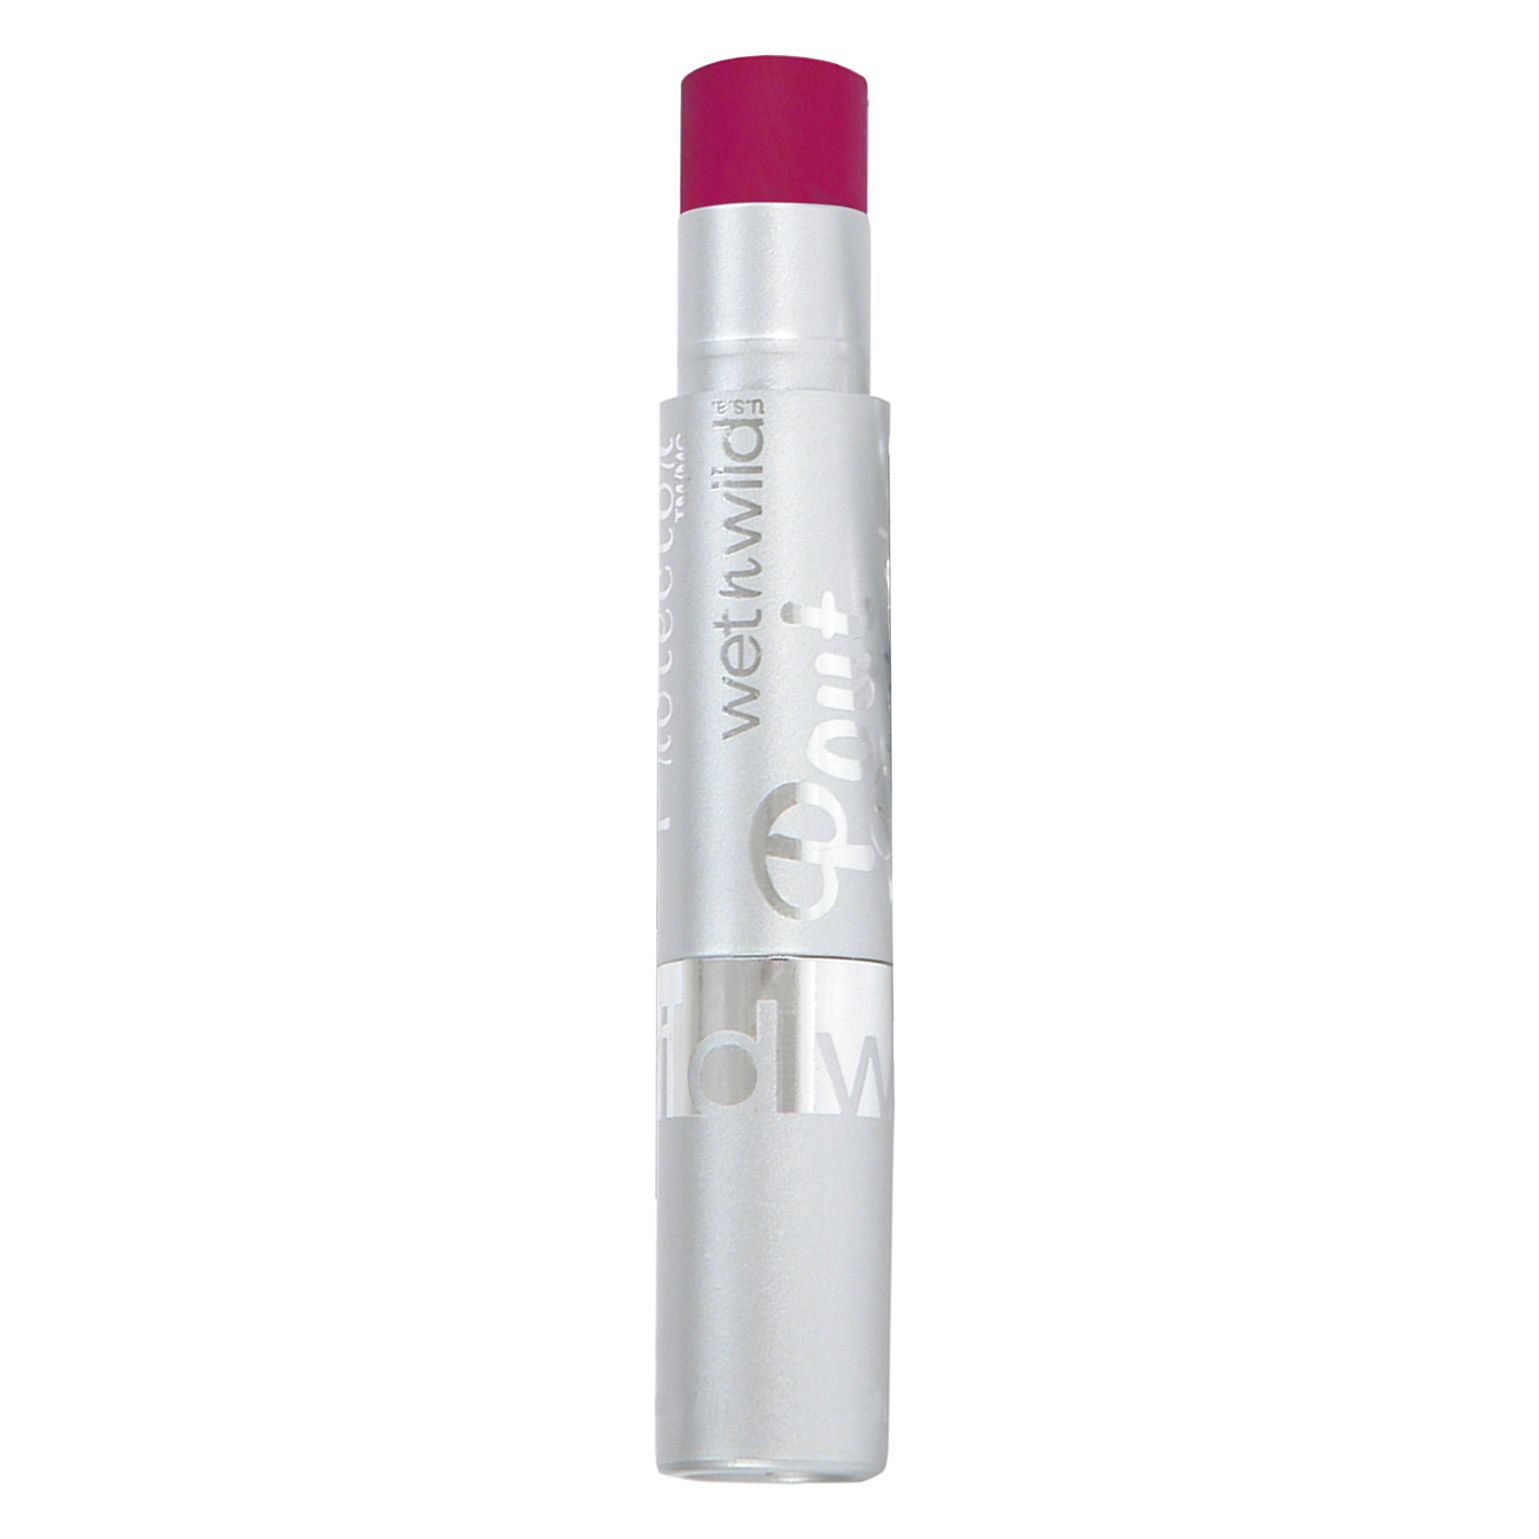 Wet n Wild Pout Protector with SPF 15